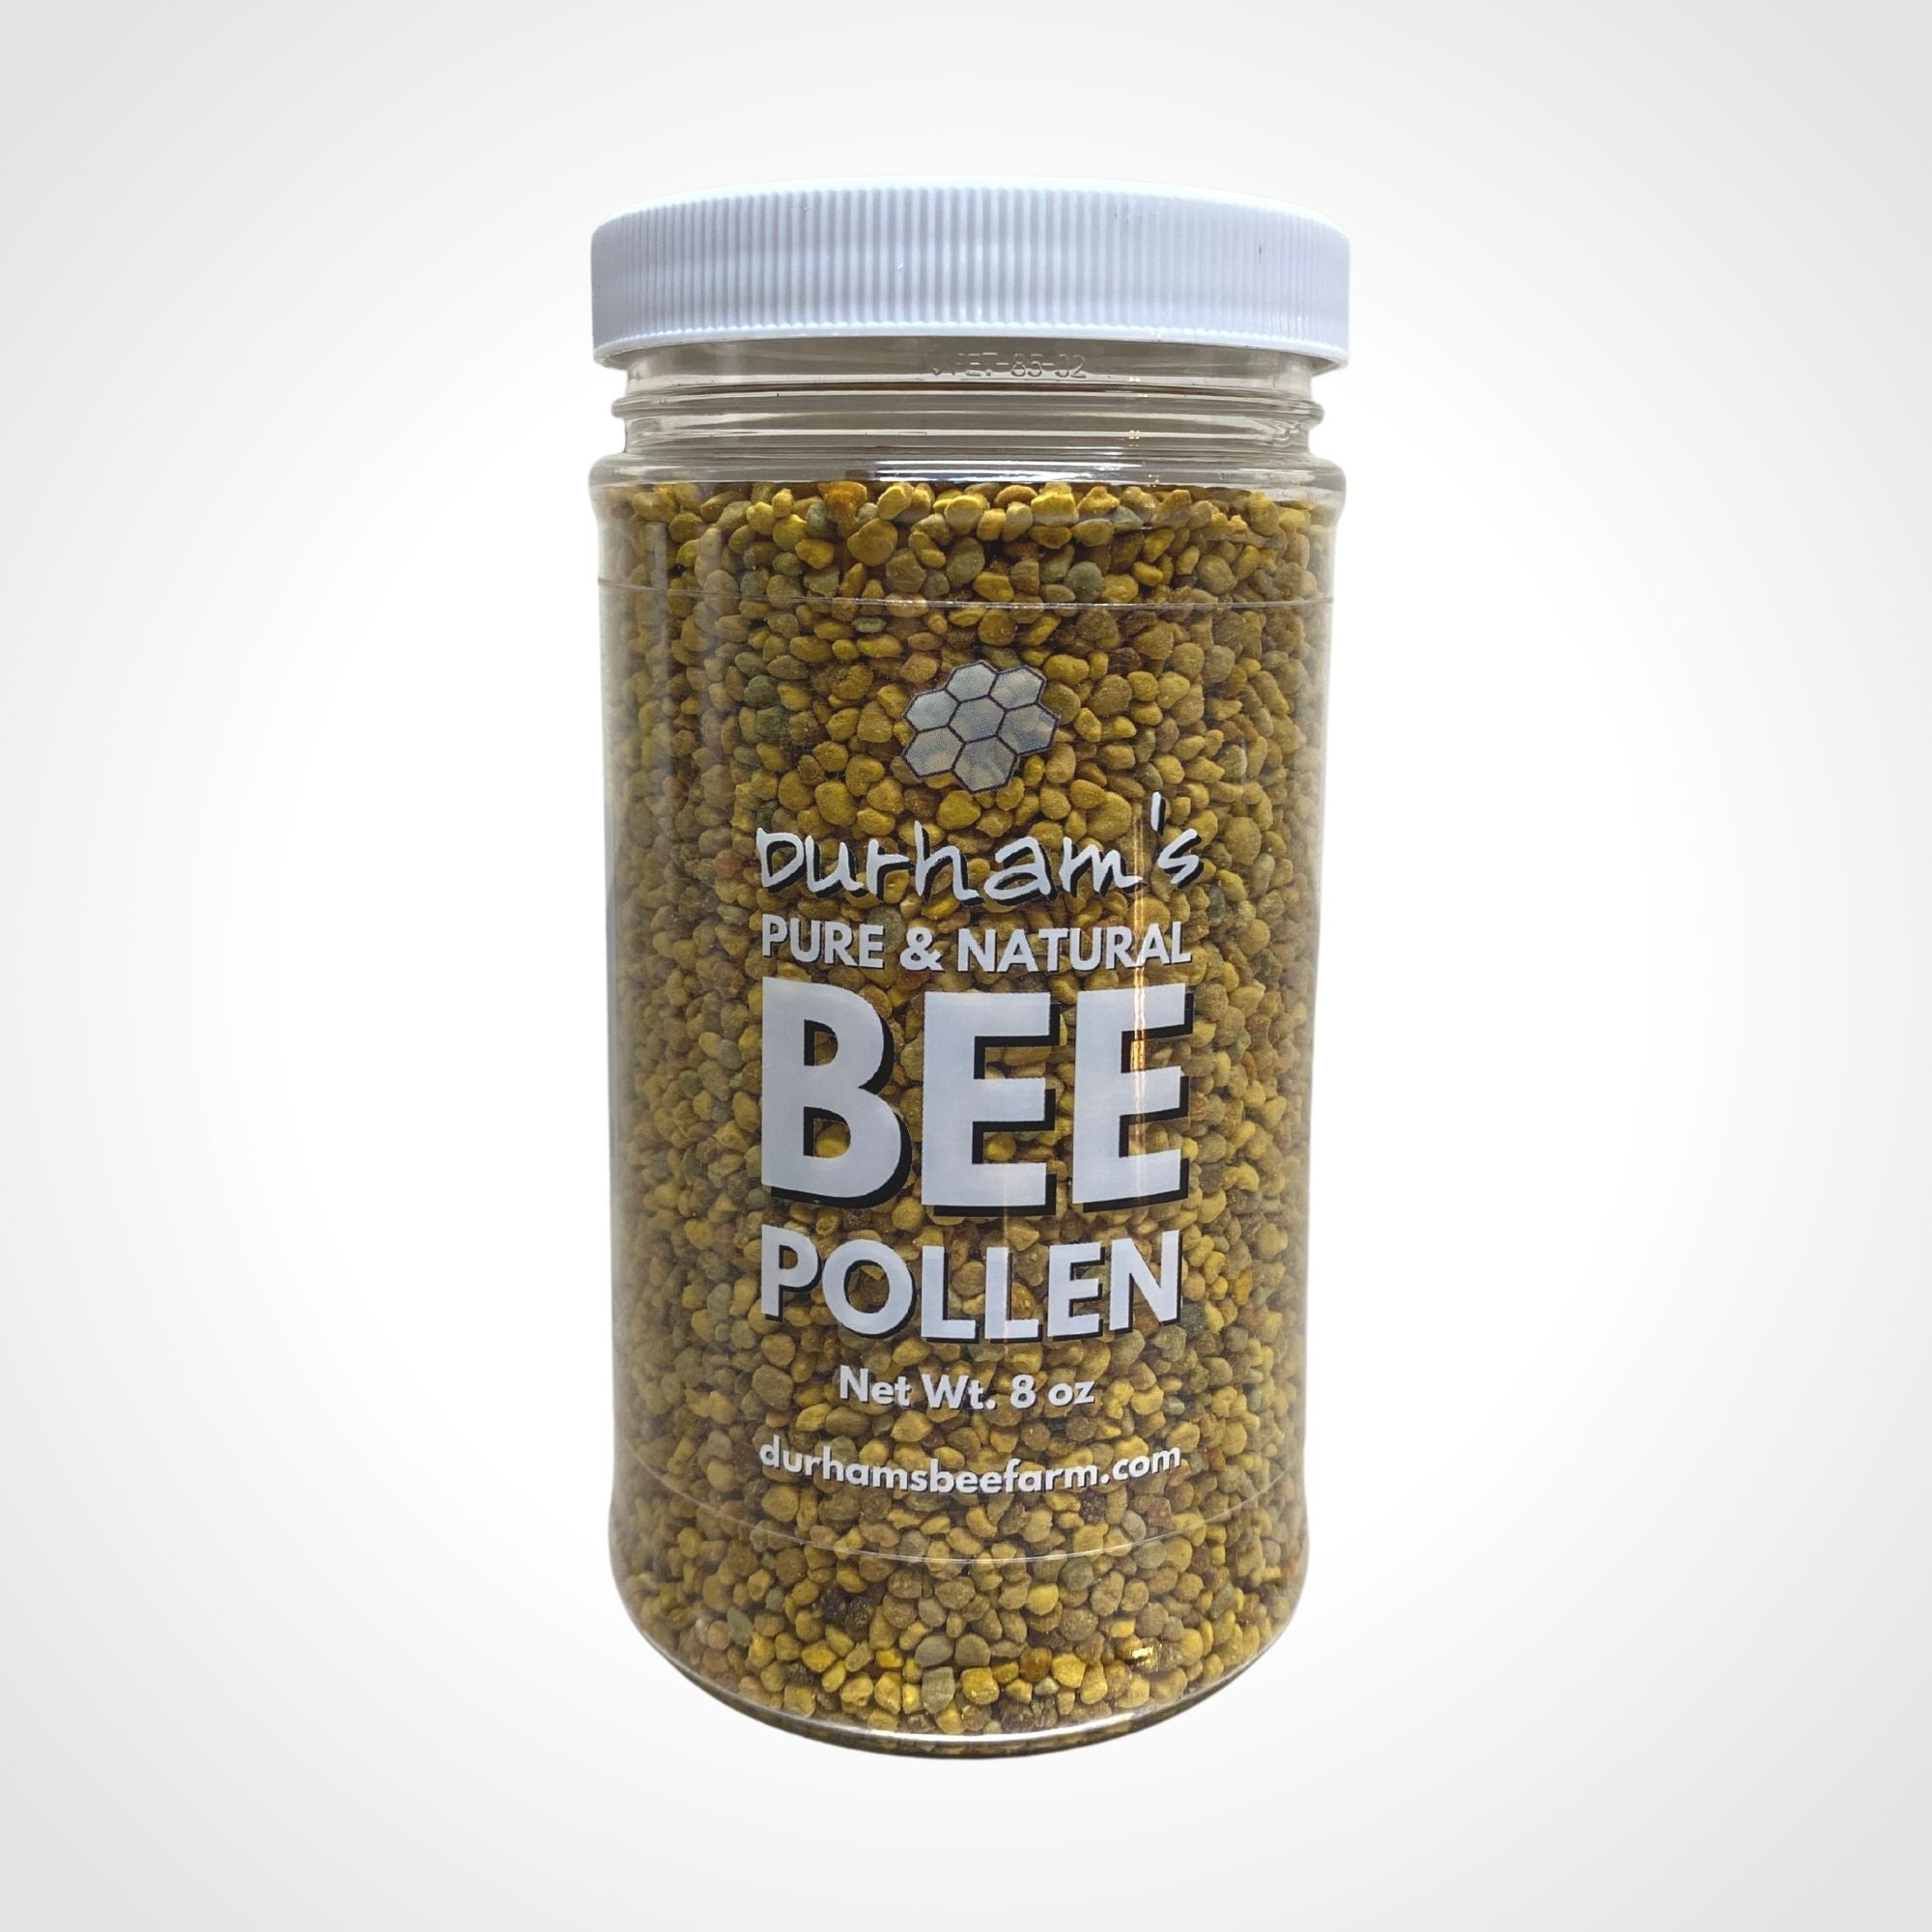 Everything you need to know about Bee Pollen